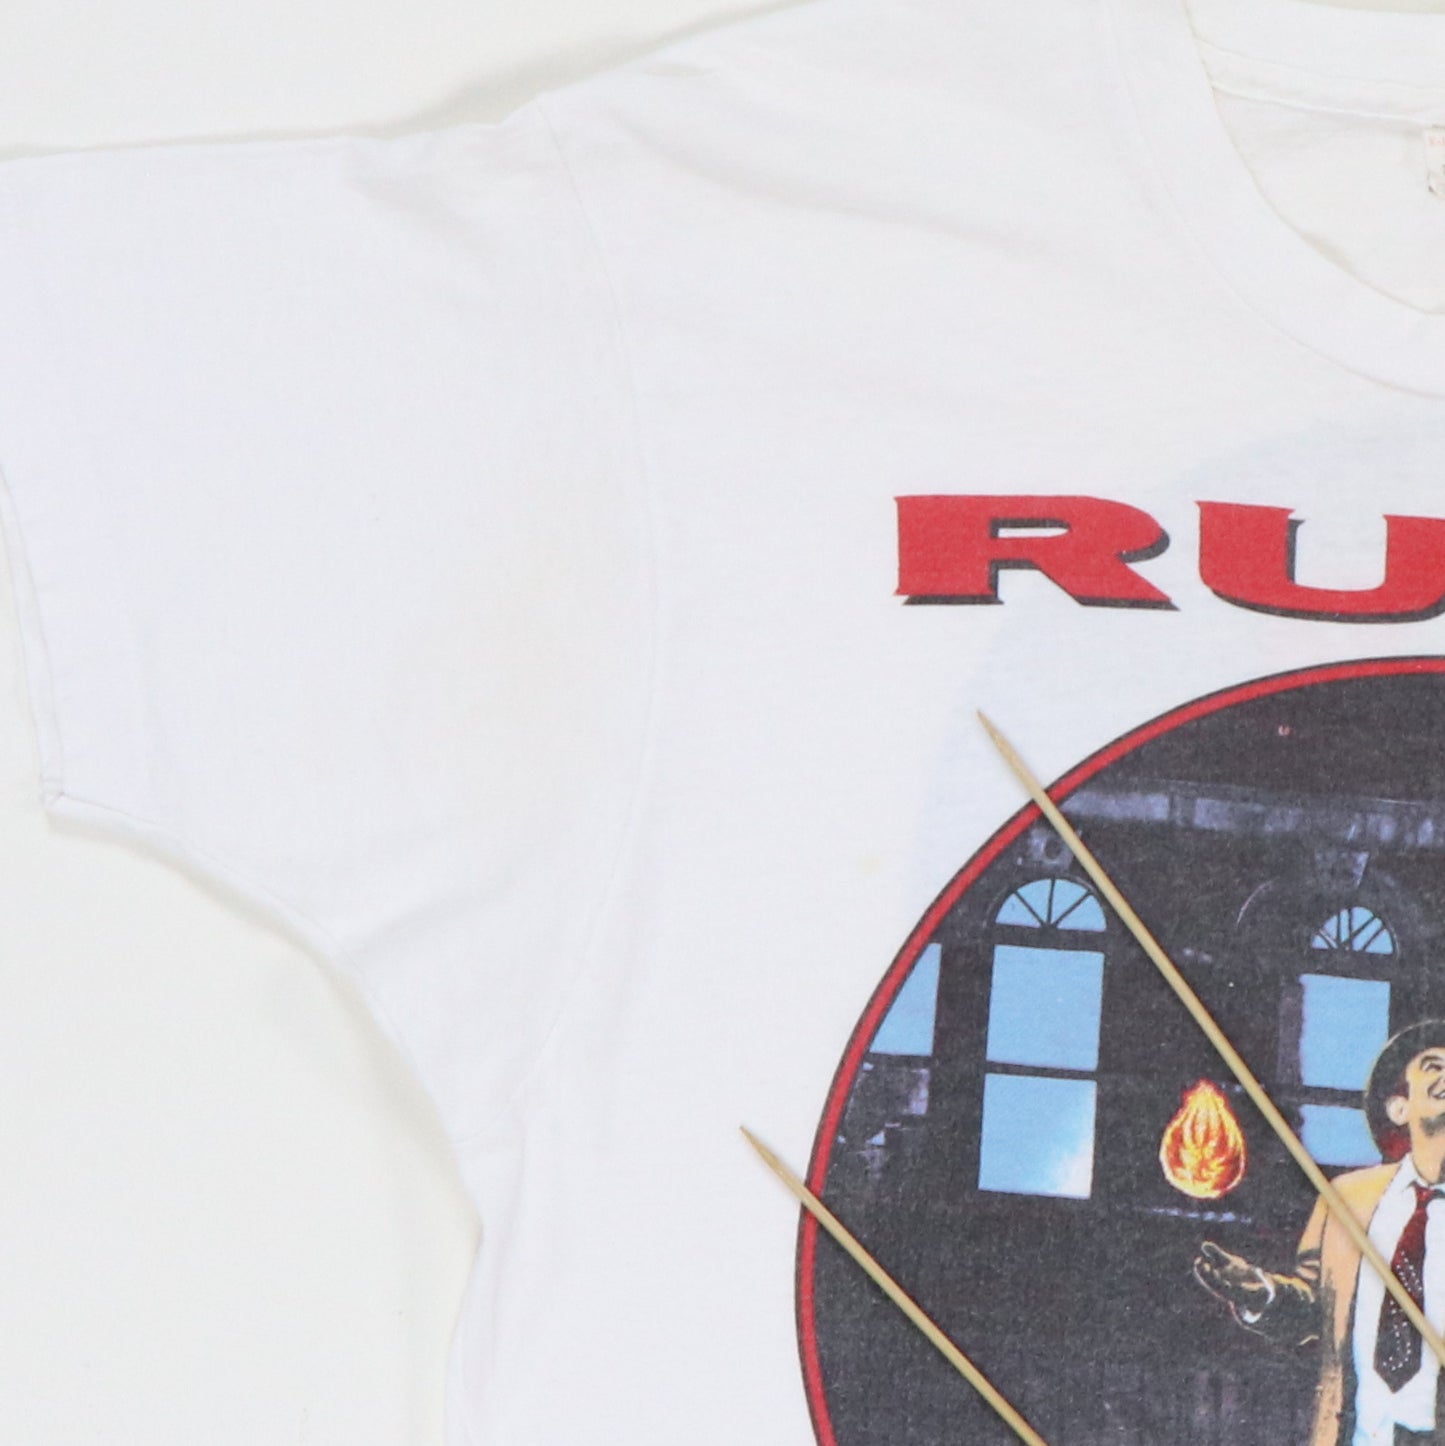 1987 Rush Hold Your Fire Tour Shirt